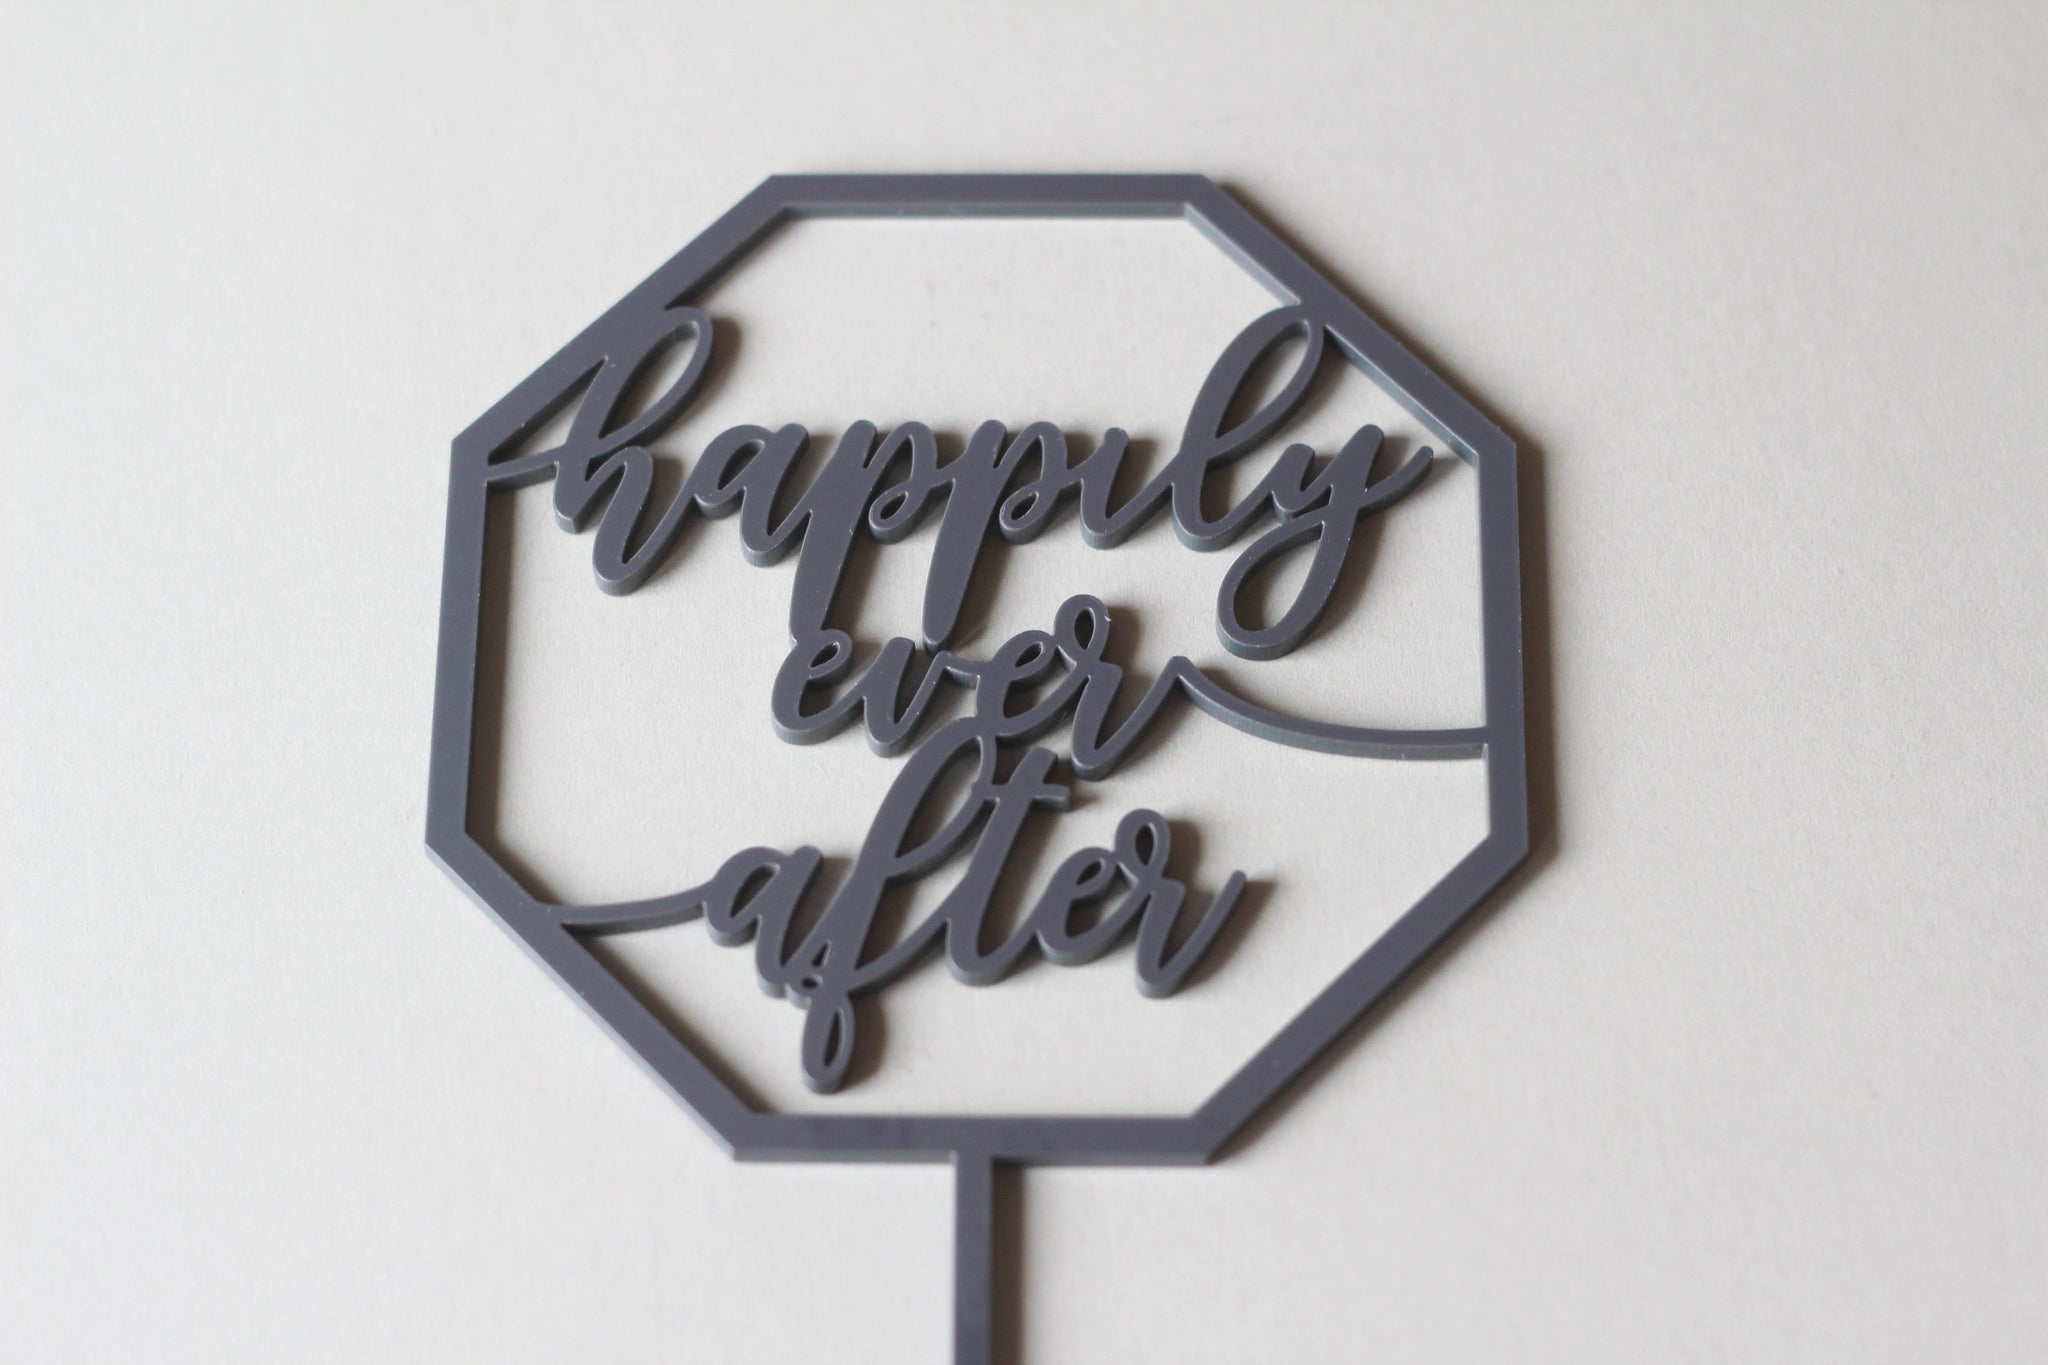 Happily Ever After Wedding Cake Topper - Wedding Topper, Cake Topper Wedding